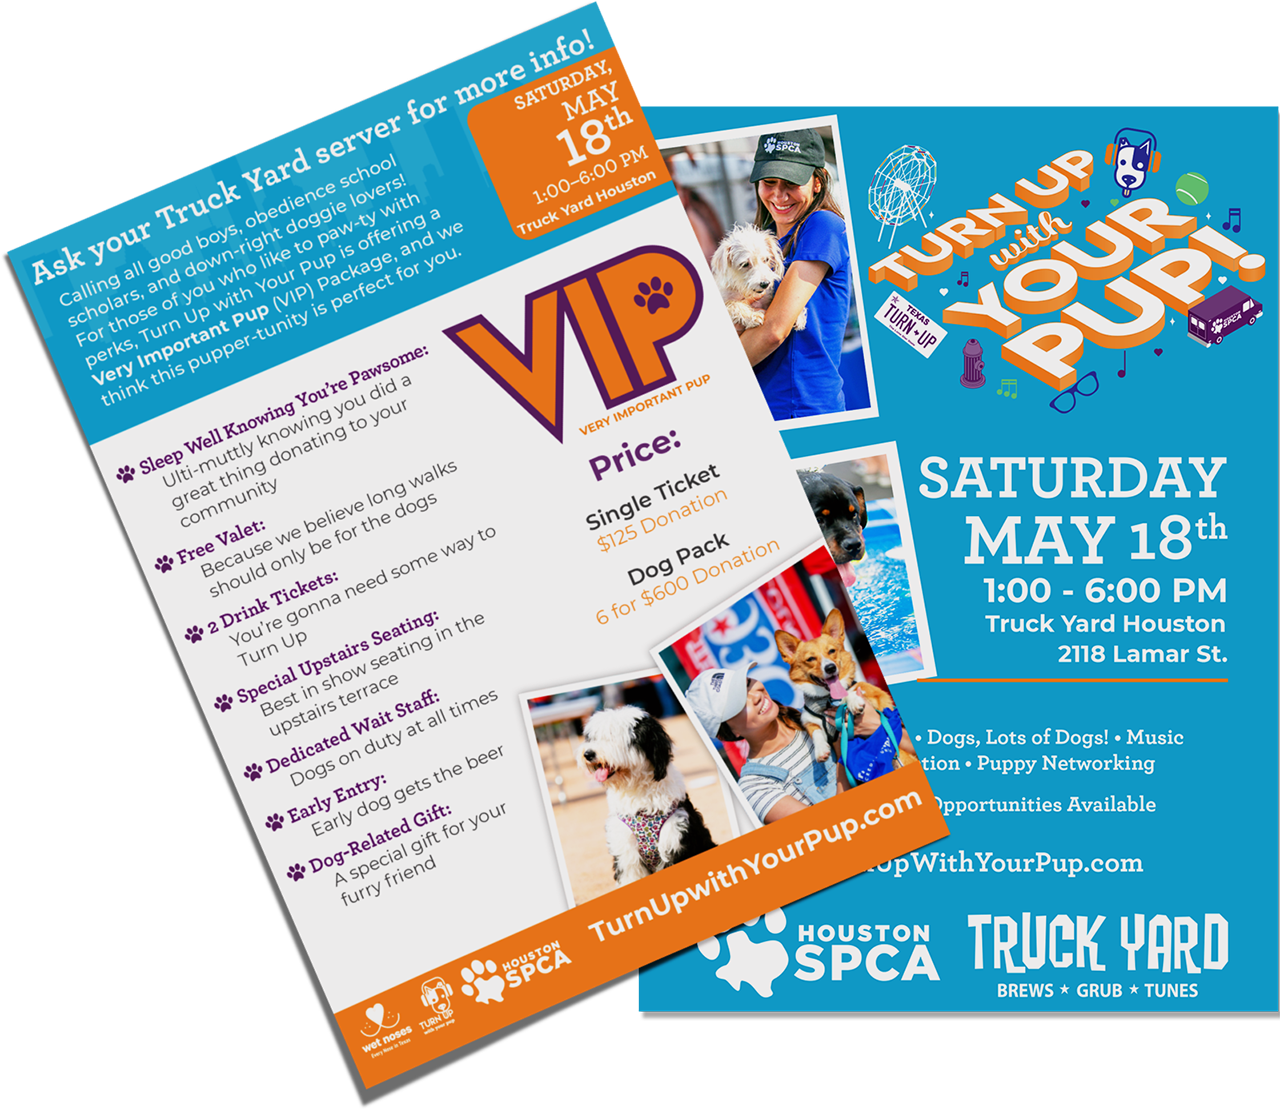 Turn Up with Your Pup VIP Postcard